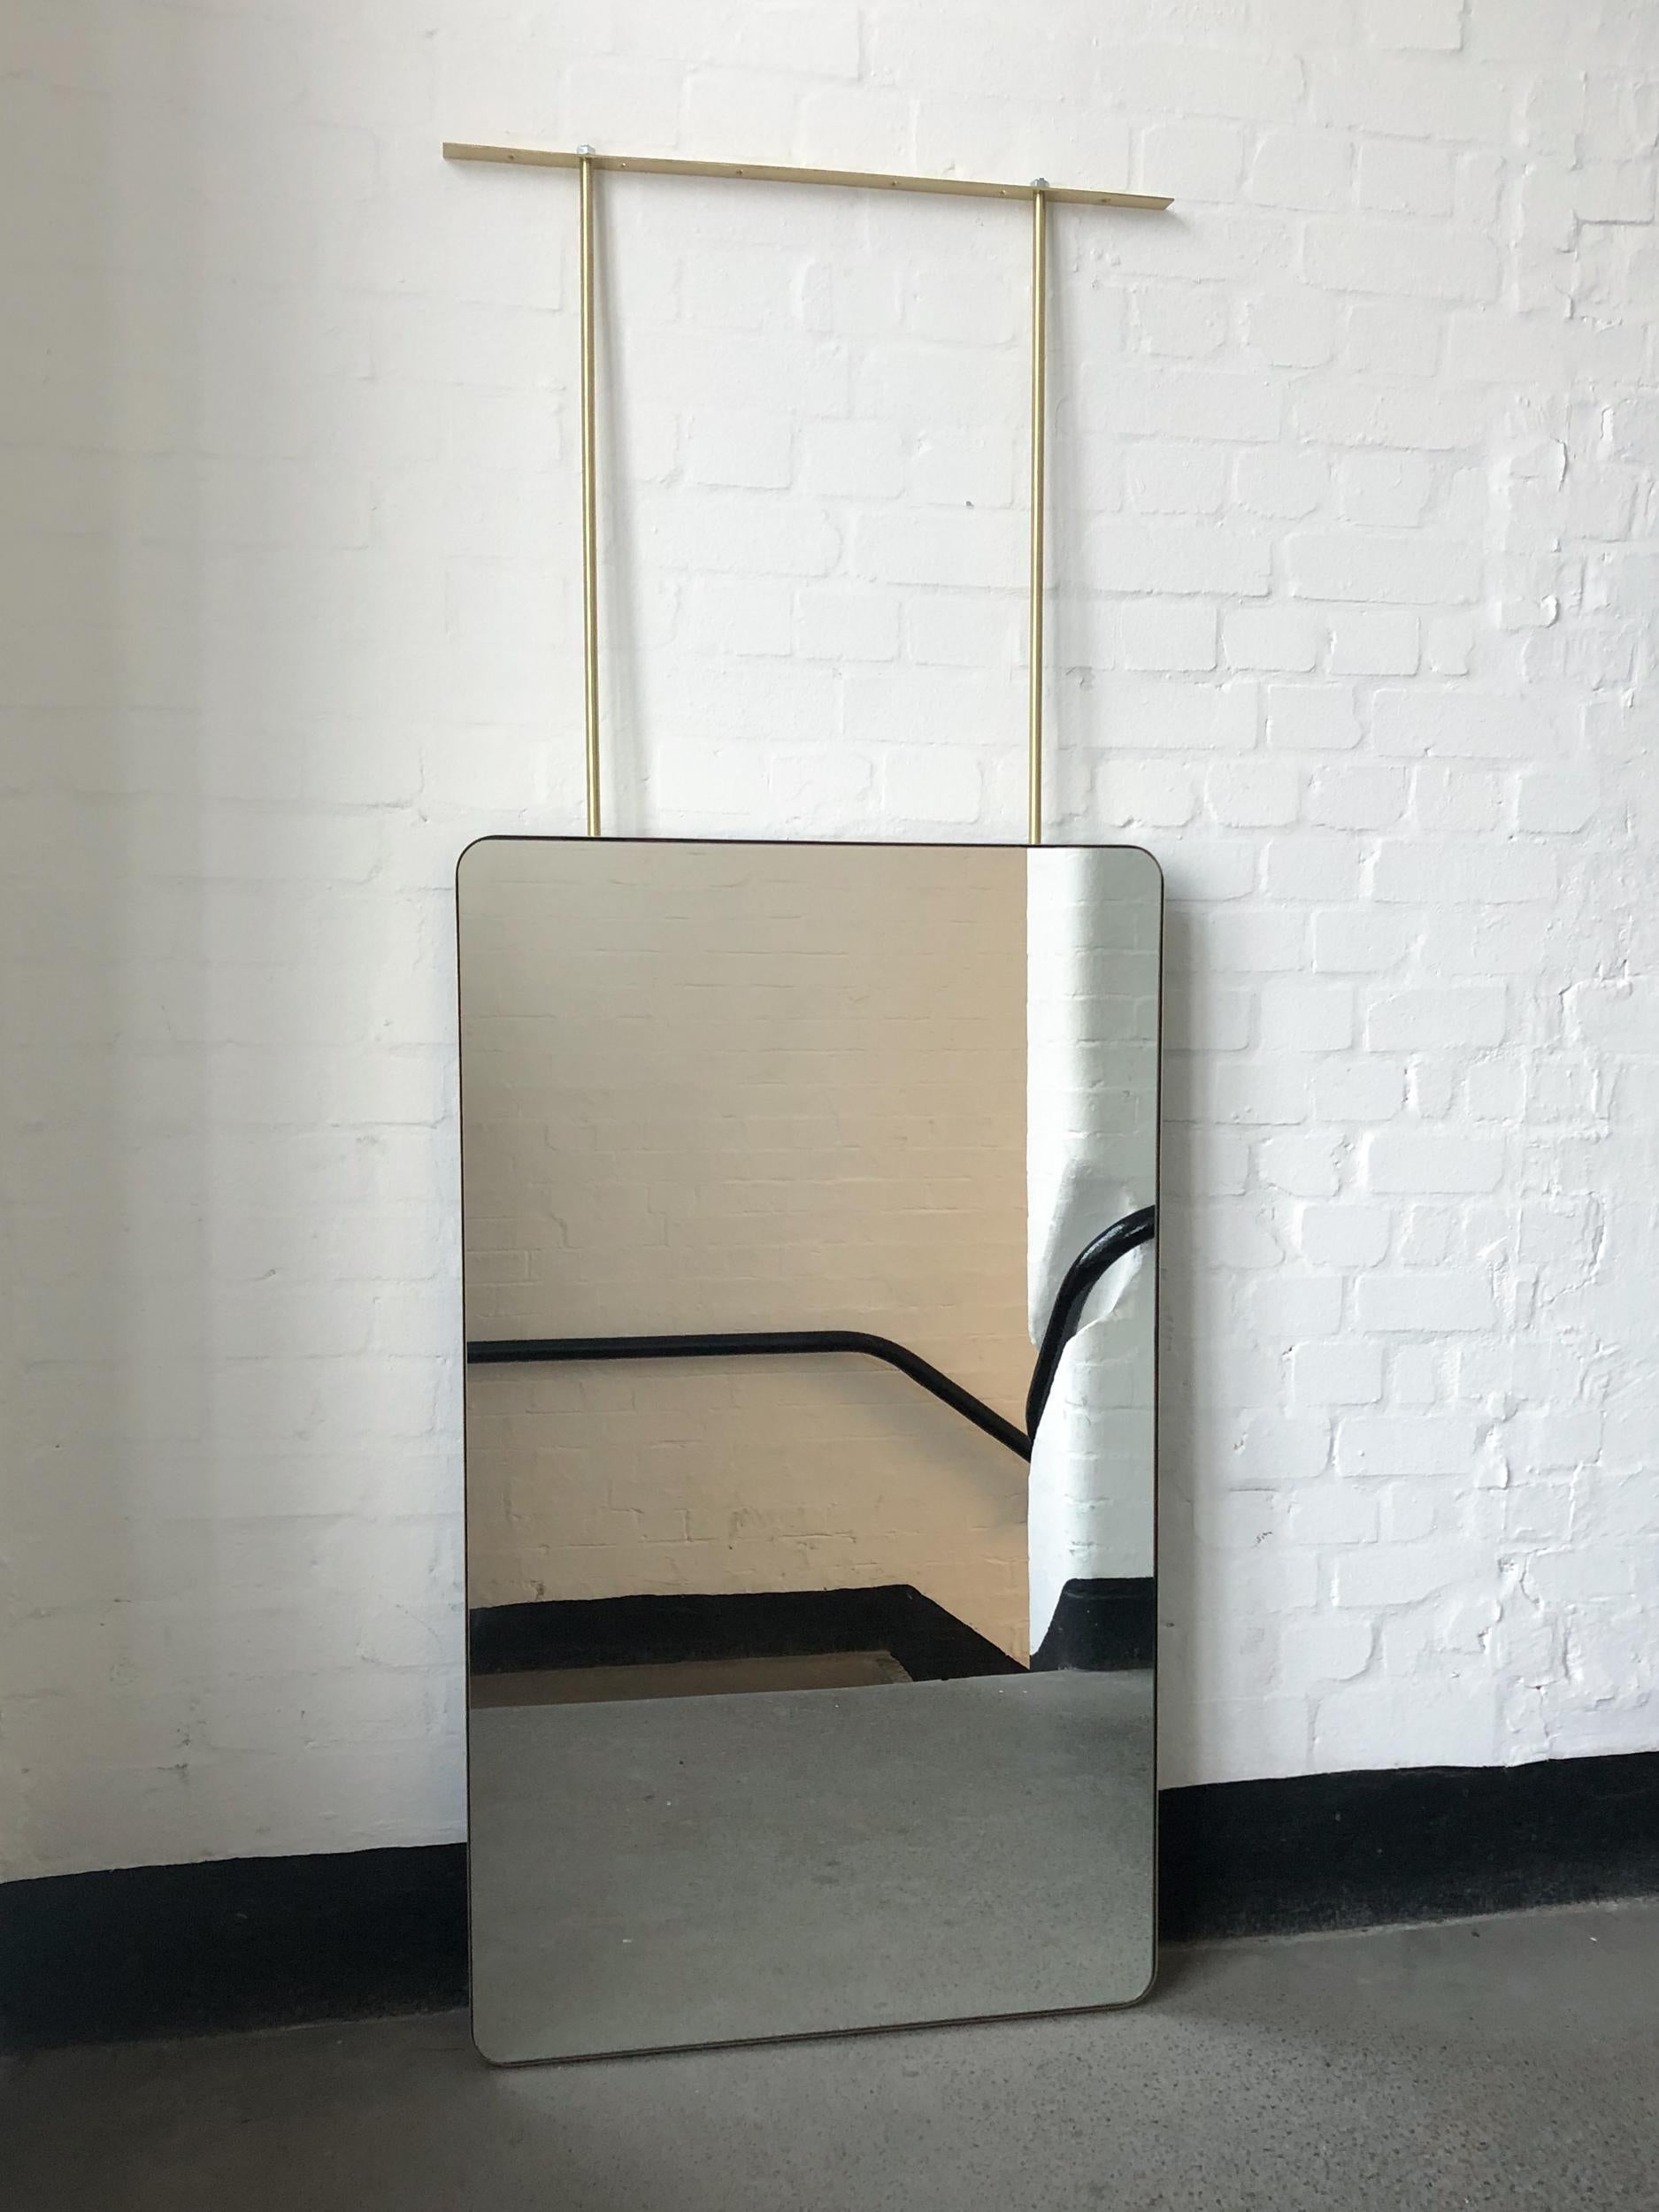 The images in this bespoke listing do not represent the approved modifications, and they refer to a standard size of the suspended Quadris™ mirror with a brushed brass frame and two rods. All specifications for this particular listing are as